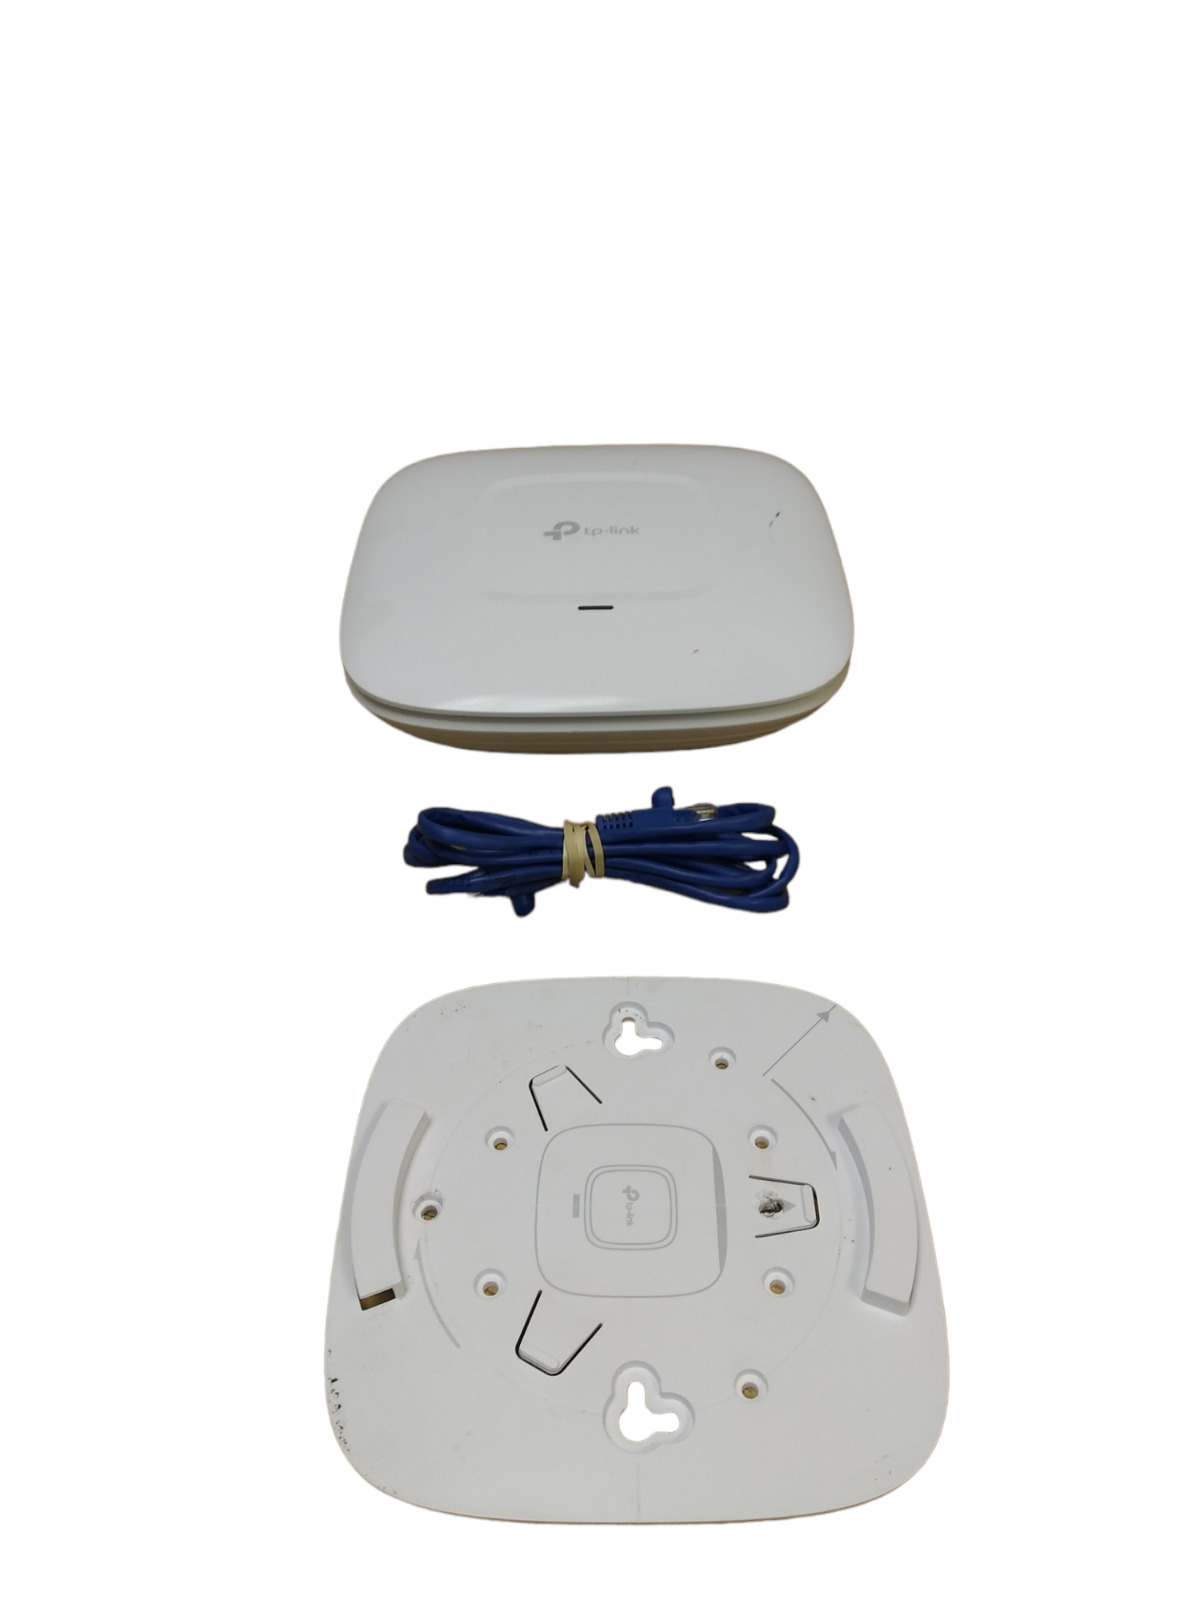 TP-Link EAP245 Ceiling Access Point (EAP245) good tested working